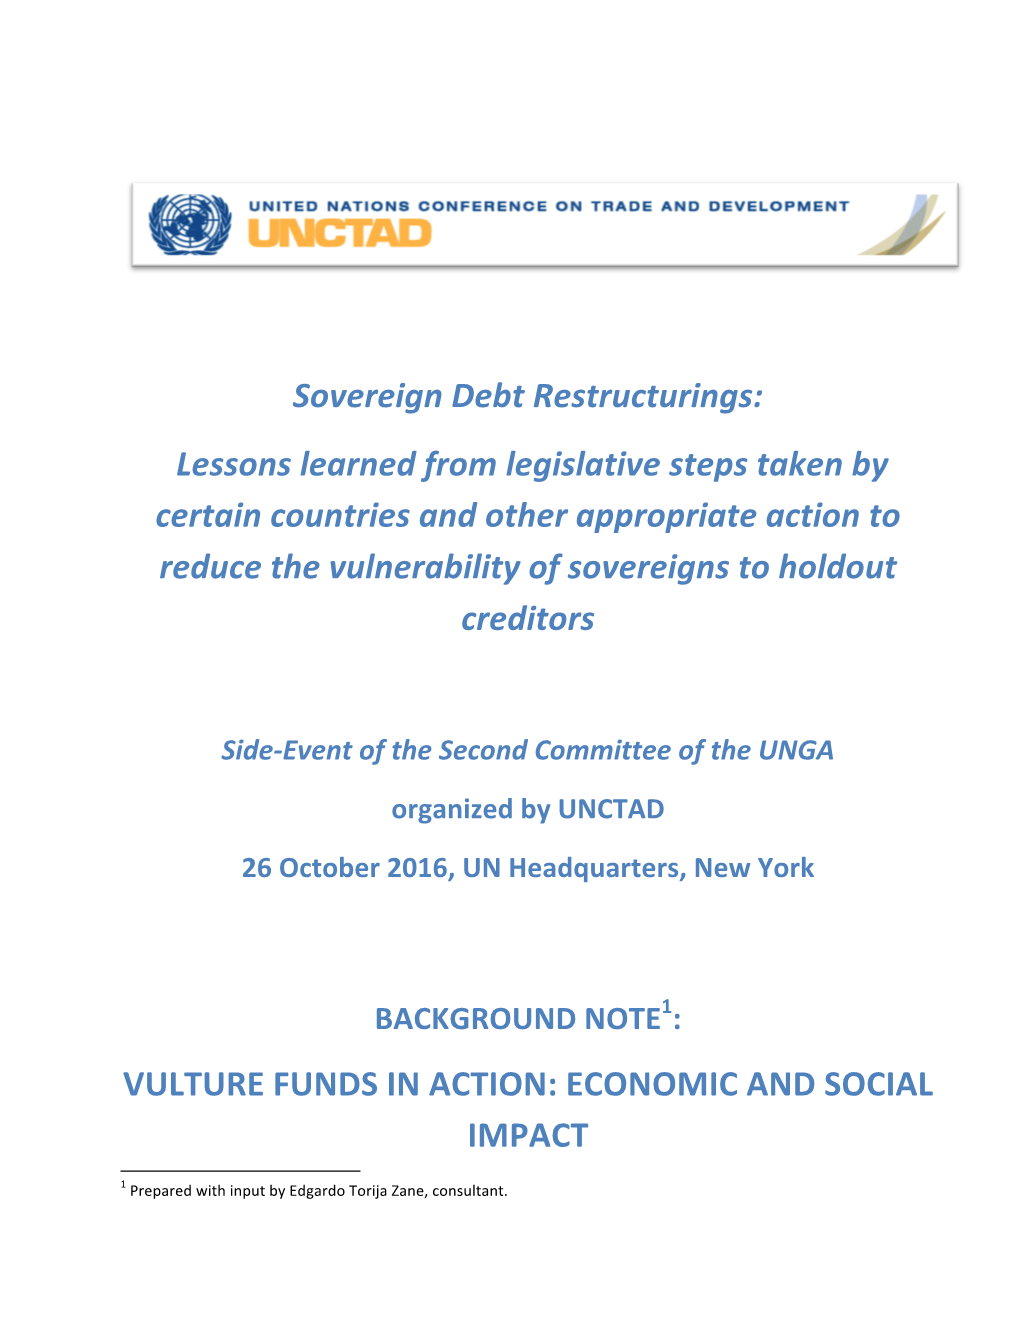 Sovereign Debt Restructurings: Lessons Learned from Legislative Steps Taken by Certain